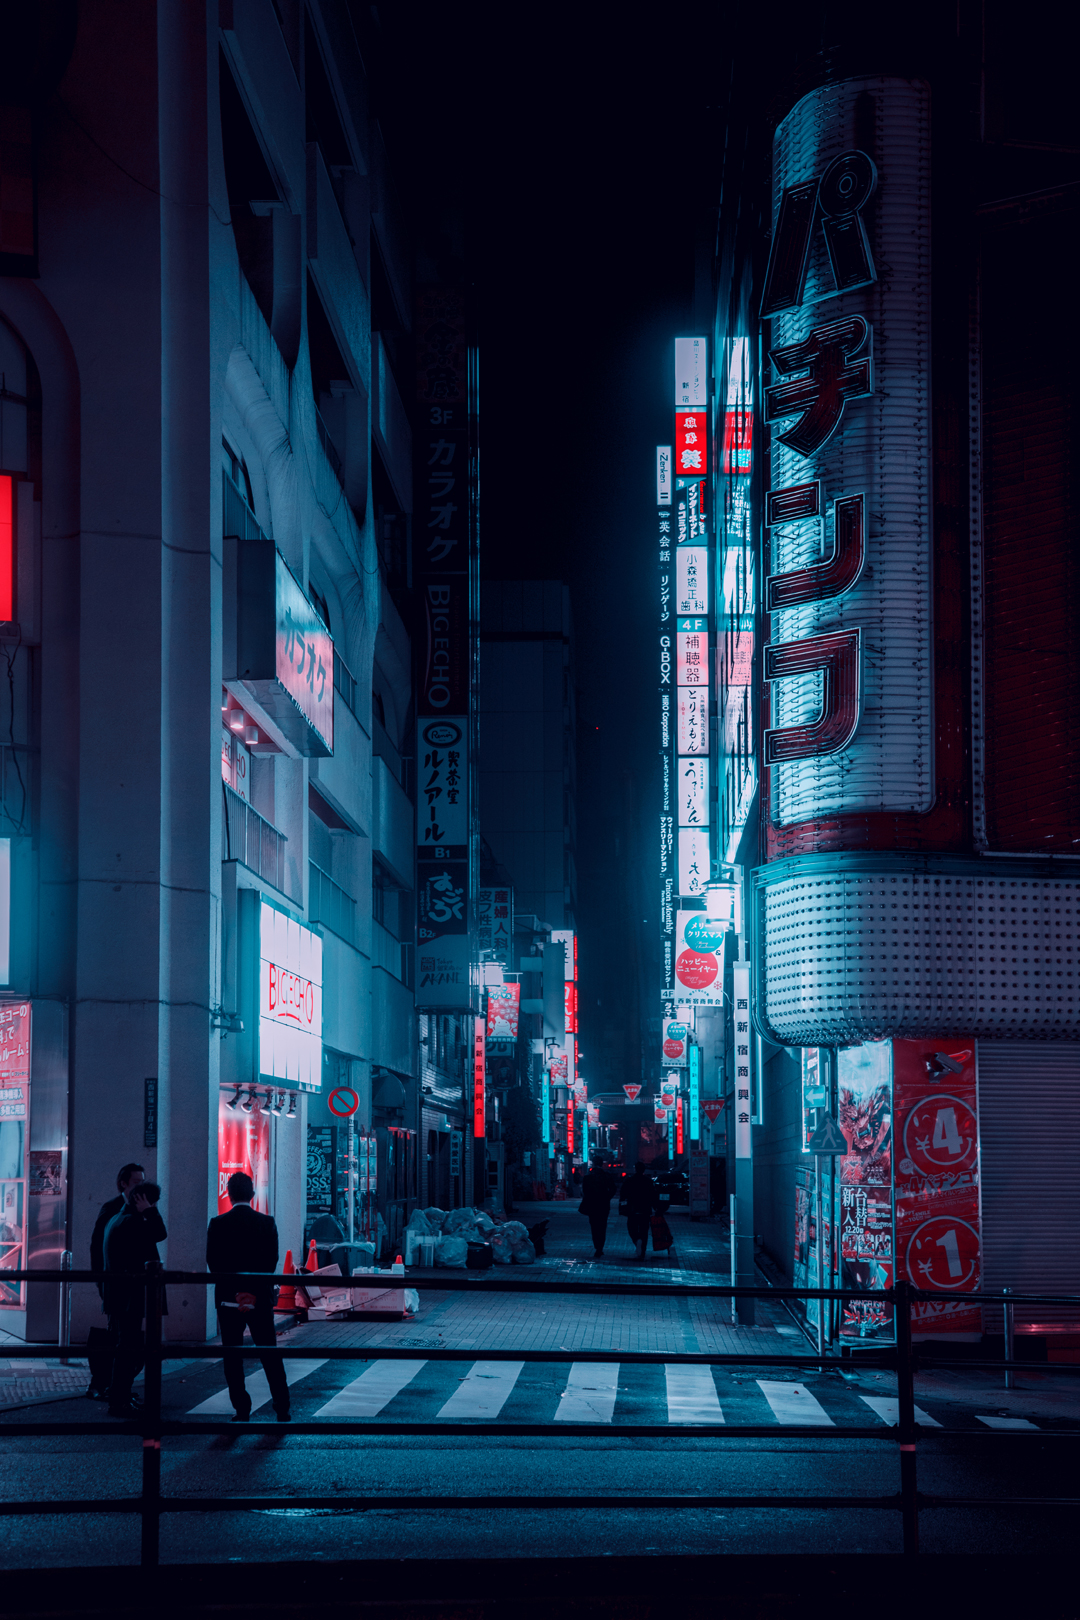 More Neon Soaked Tokyo Photo From Liam Wong